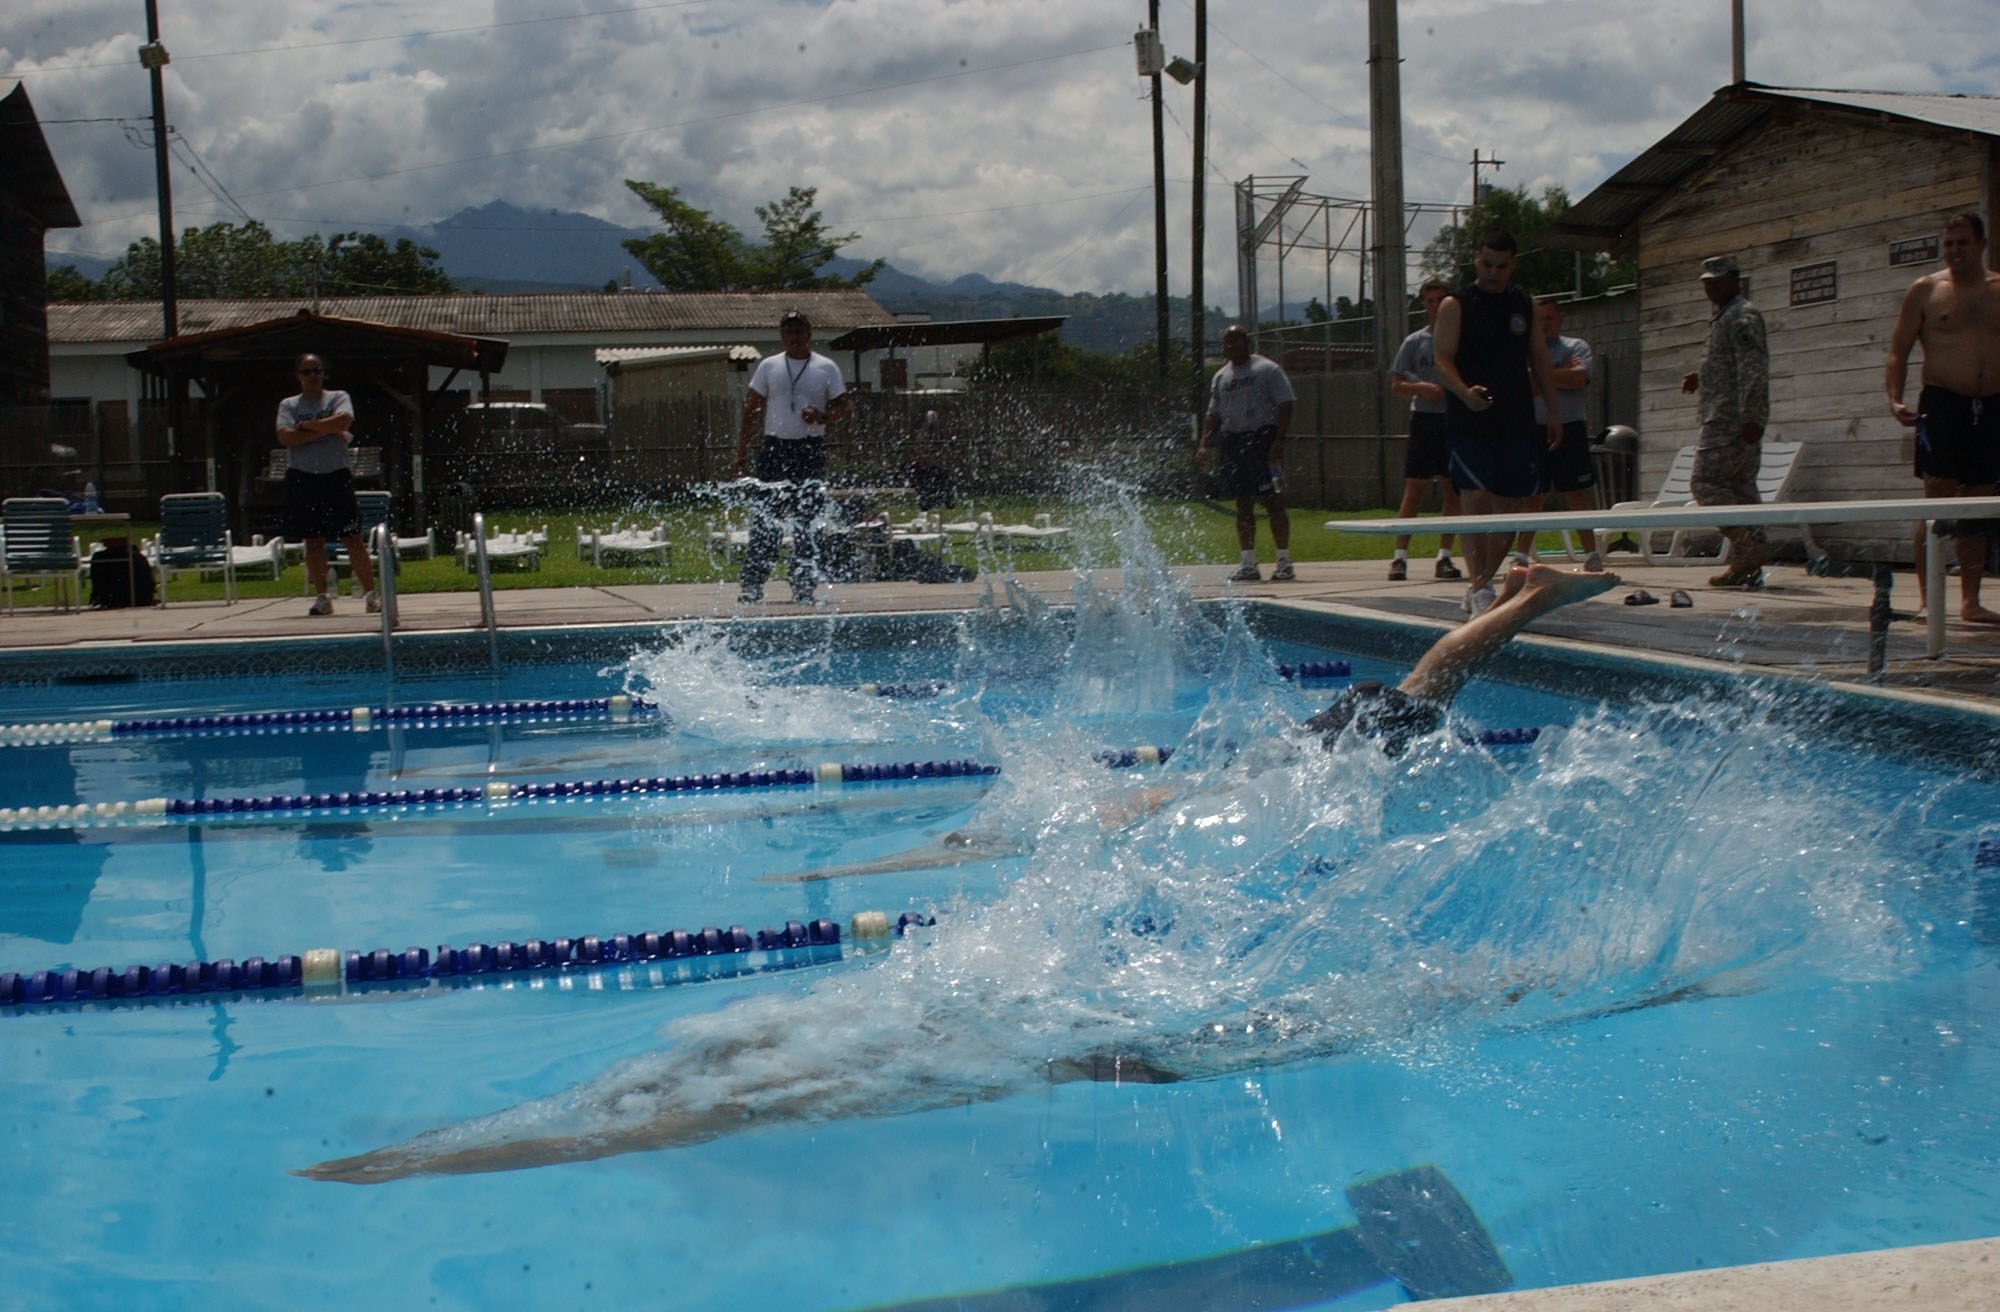 Competitiors dive in to the base pool during the swimming competition at JTF-Bravo Sports Day June 13. JTF-Bravo sports day pitted athletes from Soto Cano Air Base against their Honduran military counterparts in six events; soccer, swimming, basketball, softball, volleyball and a 4x400-meter relay race. U.S. Air Force photo by Senior Airman Shaun Emery.